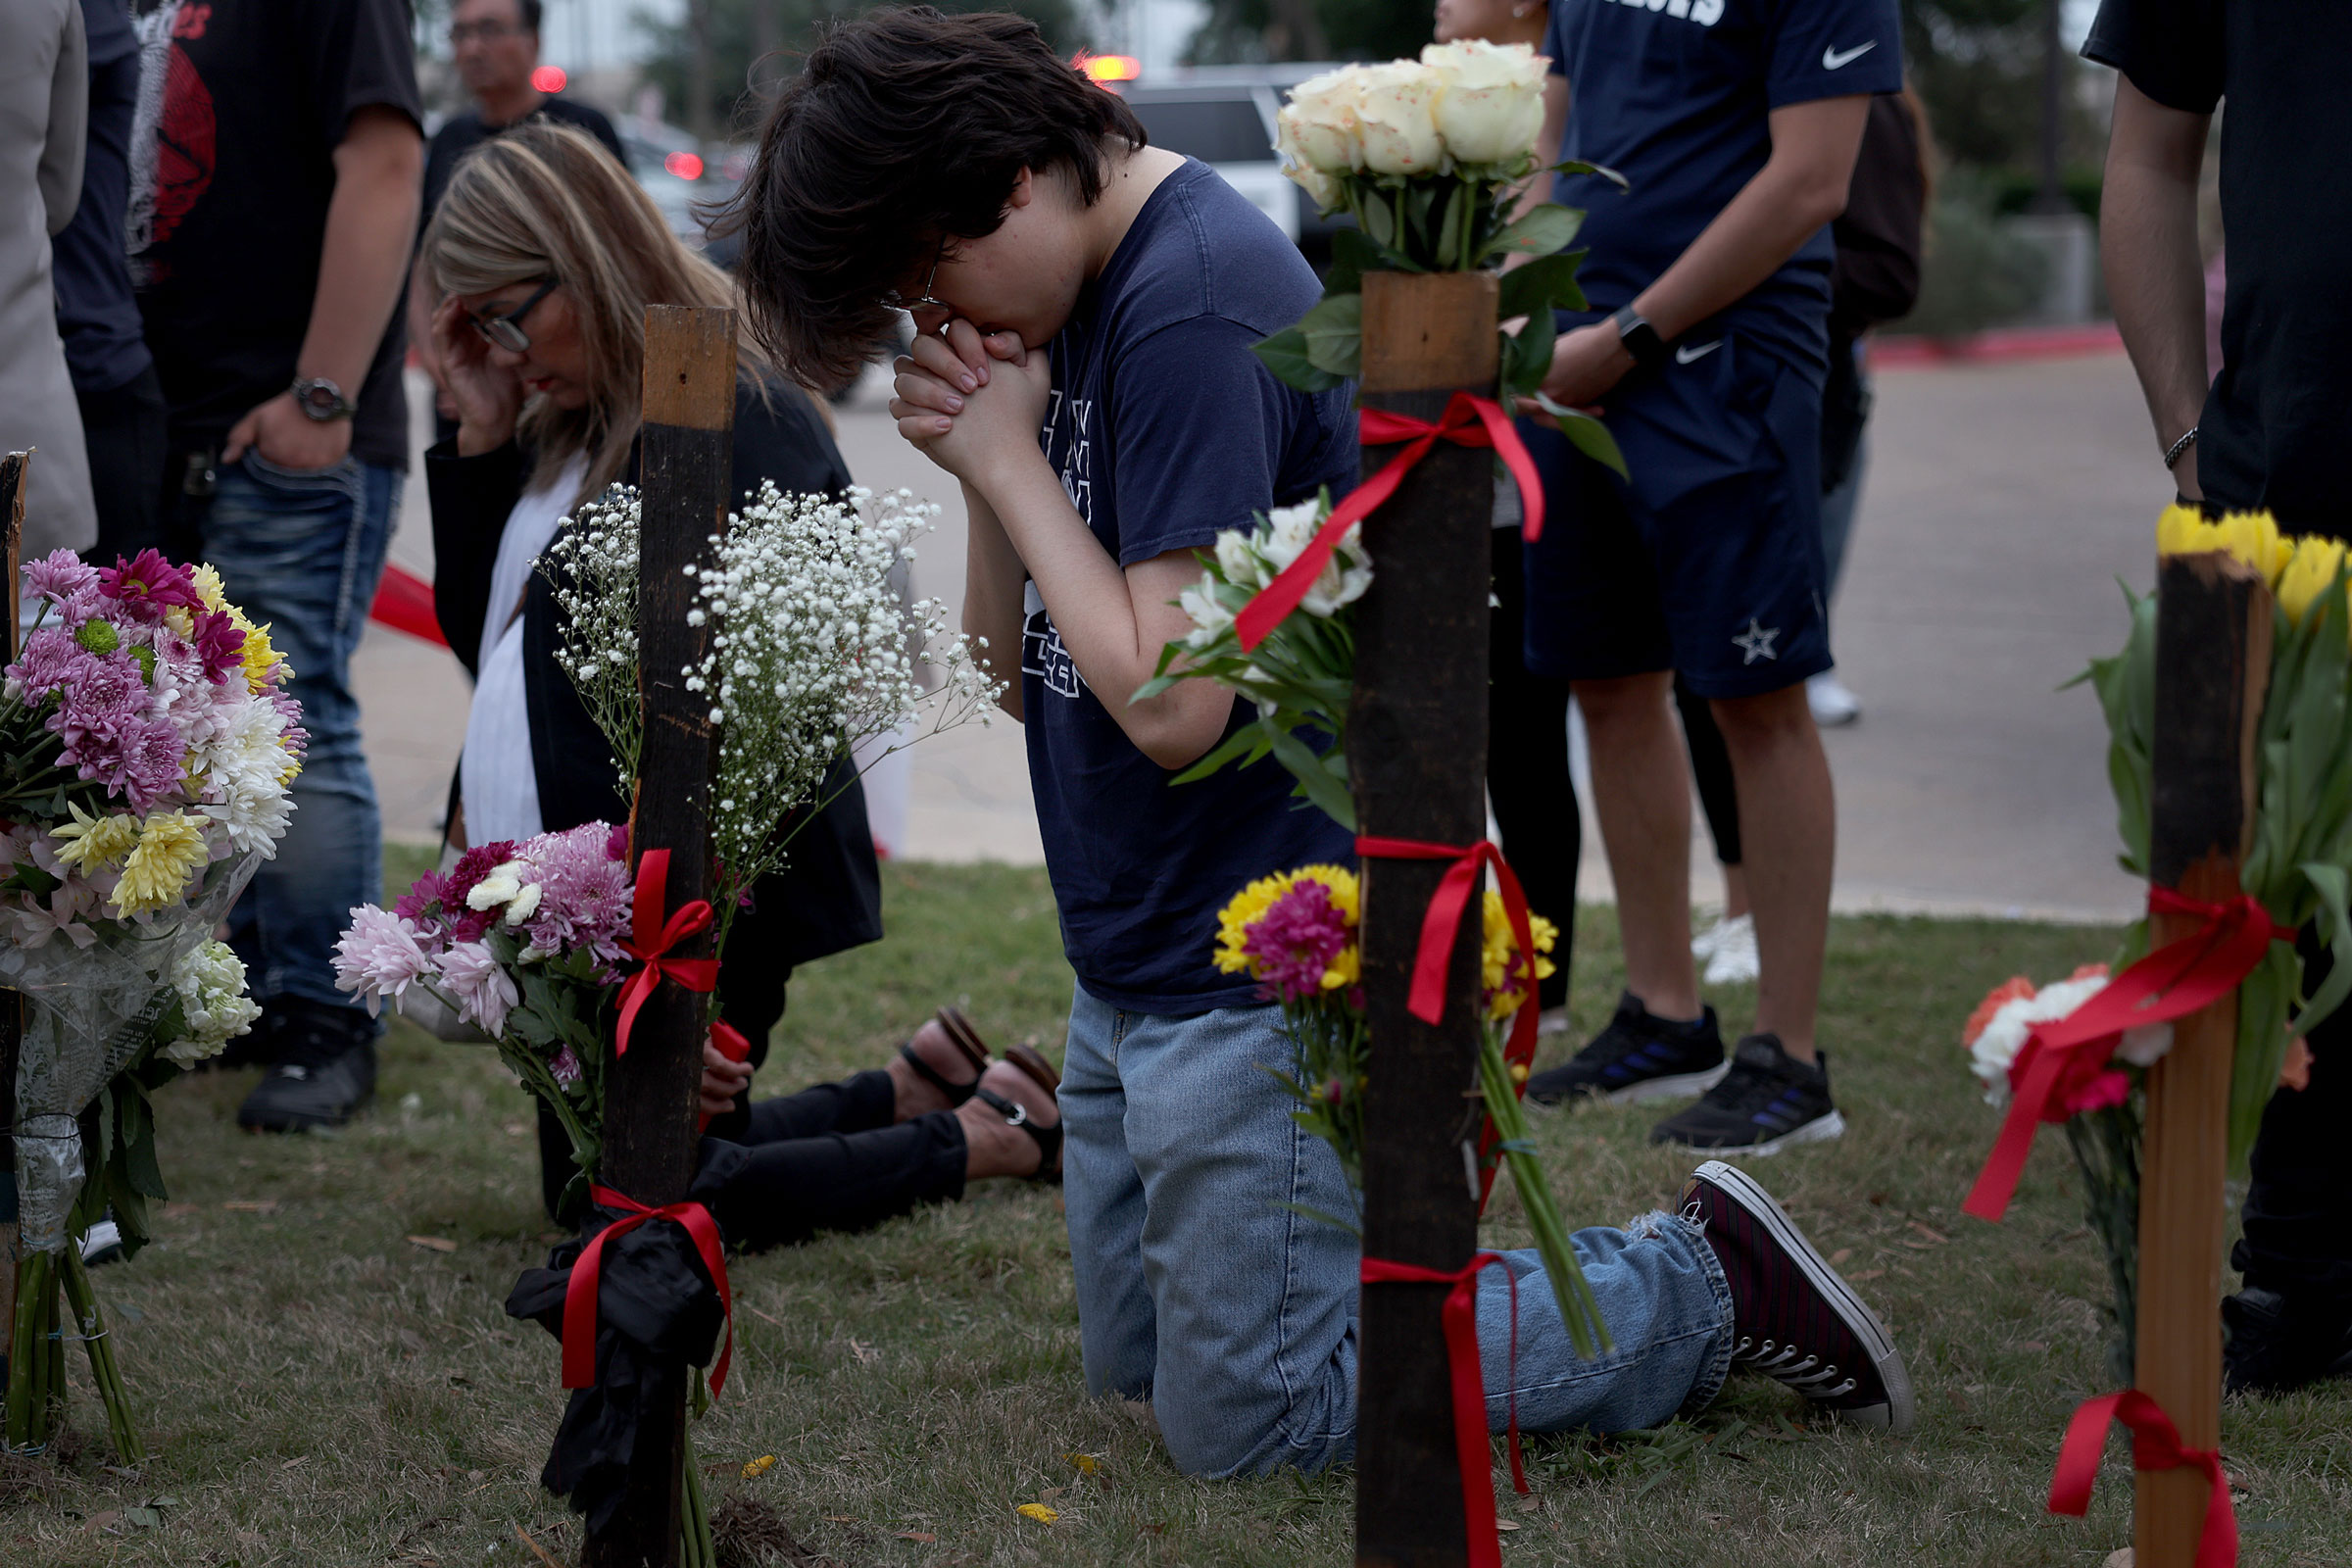 People pray at a memorial next to the Allen Premium Outlets in Allen, Texas, on May 7